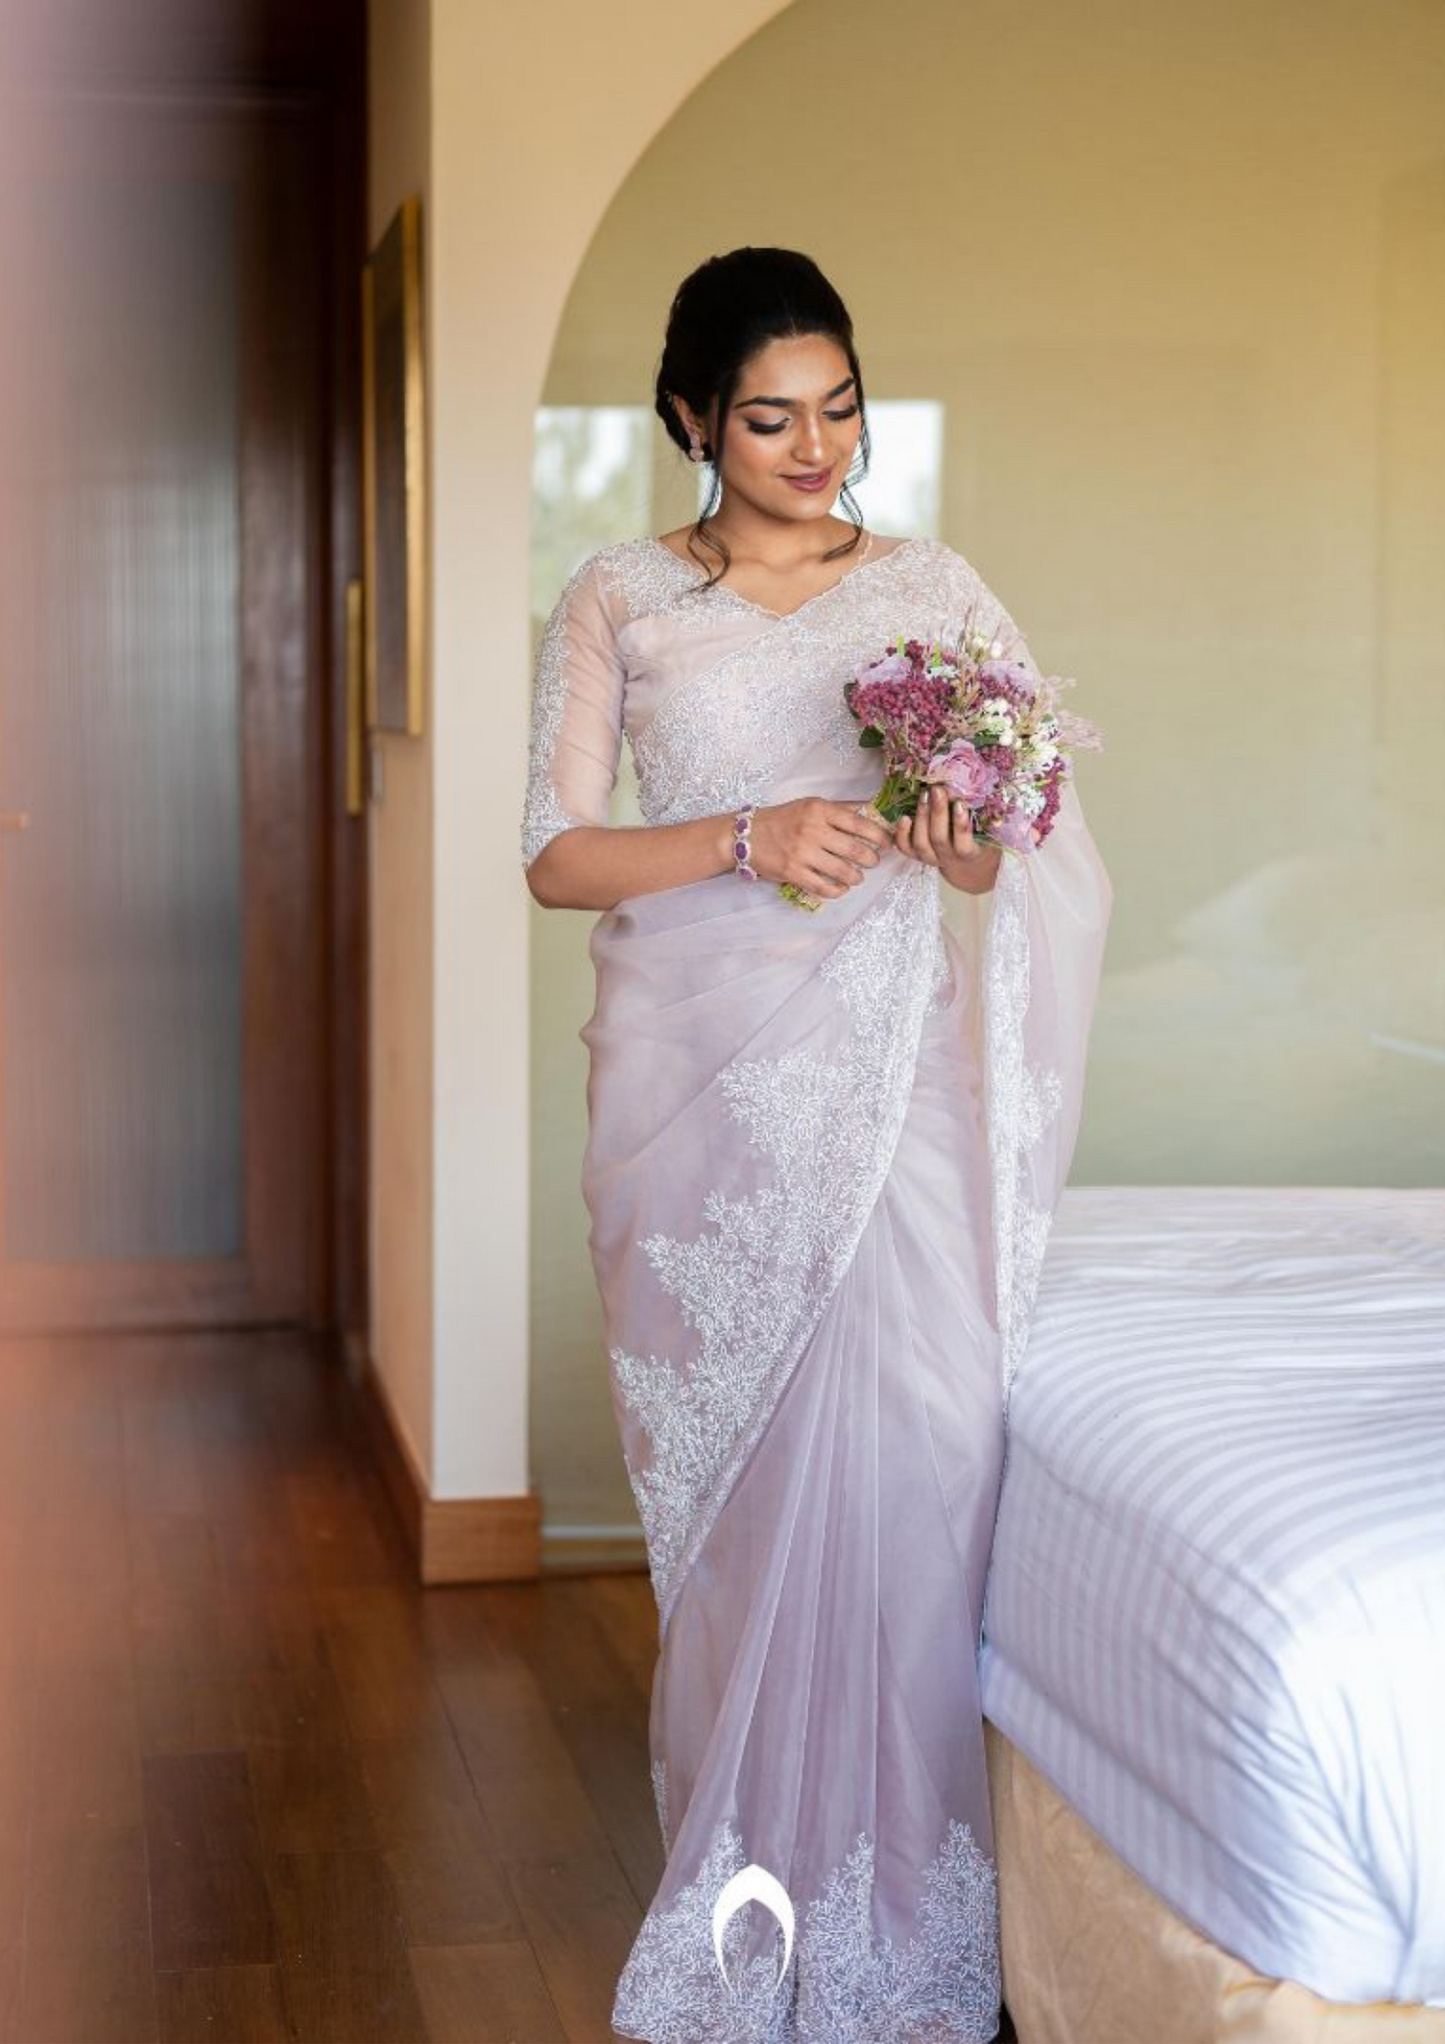 Signature Christian bridal saree in pink with intricate heavy hand embroidery